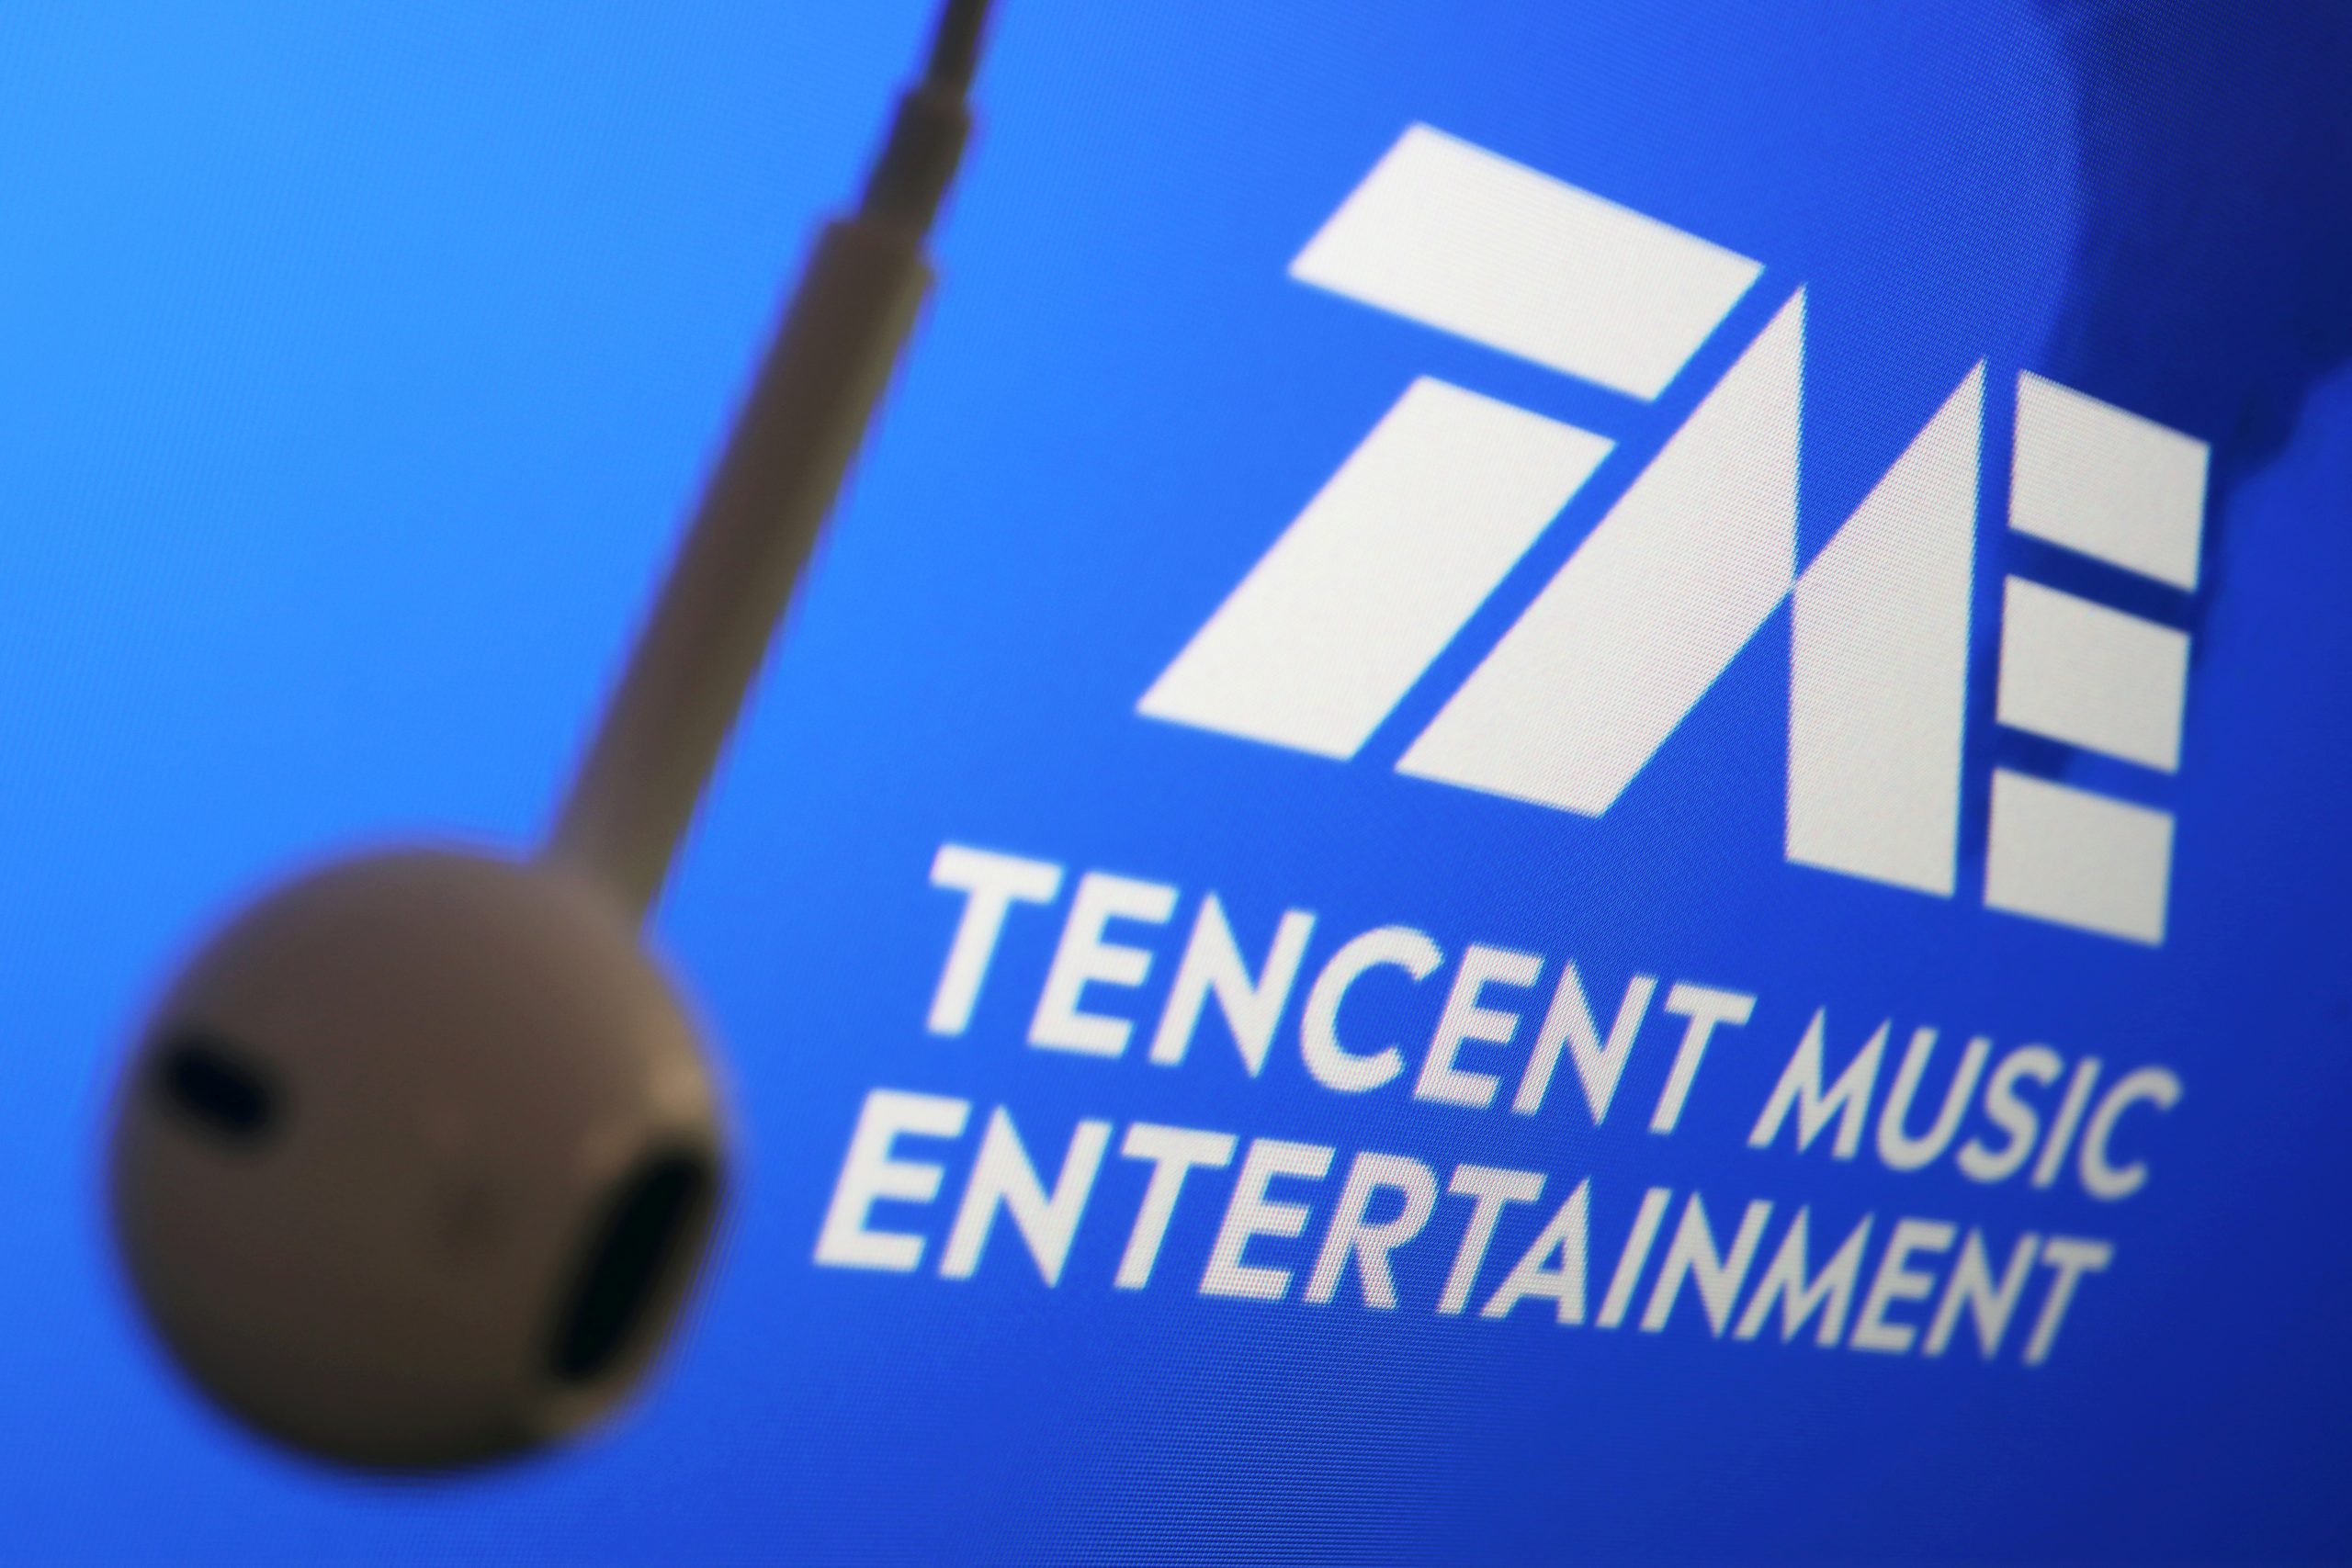  Tencent Music takes copyright rules in stride, earnings beat estimates